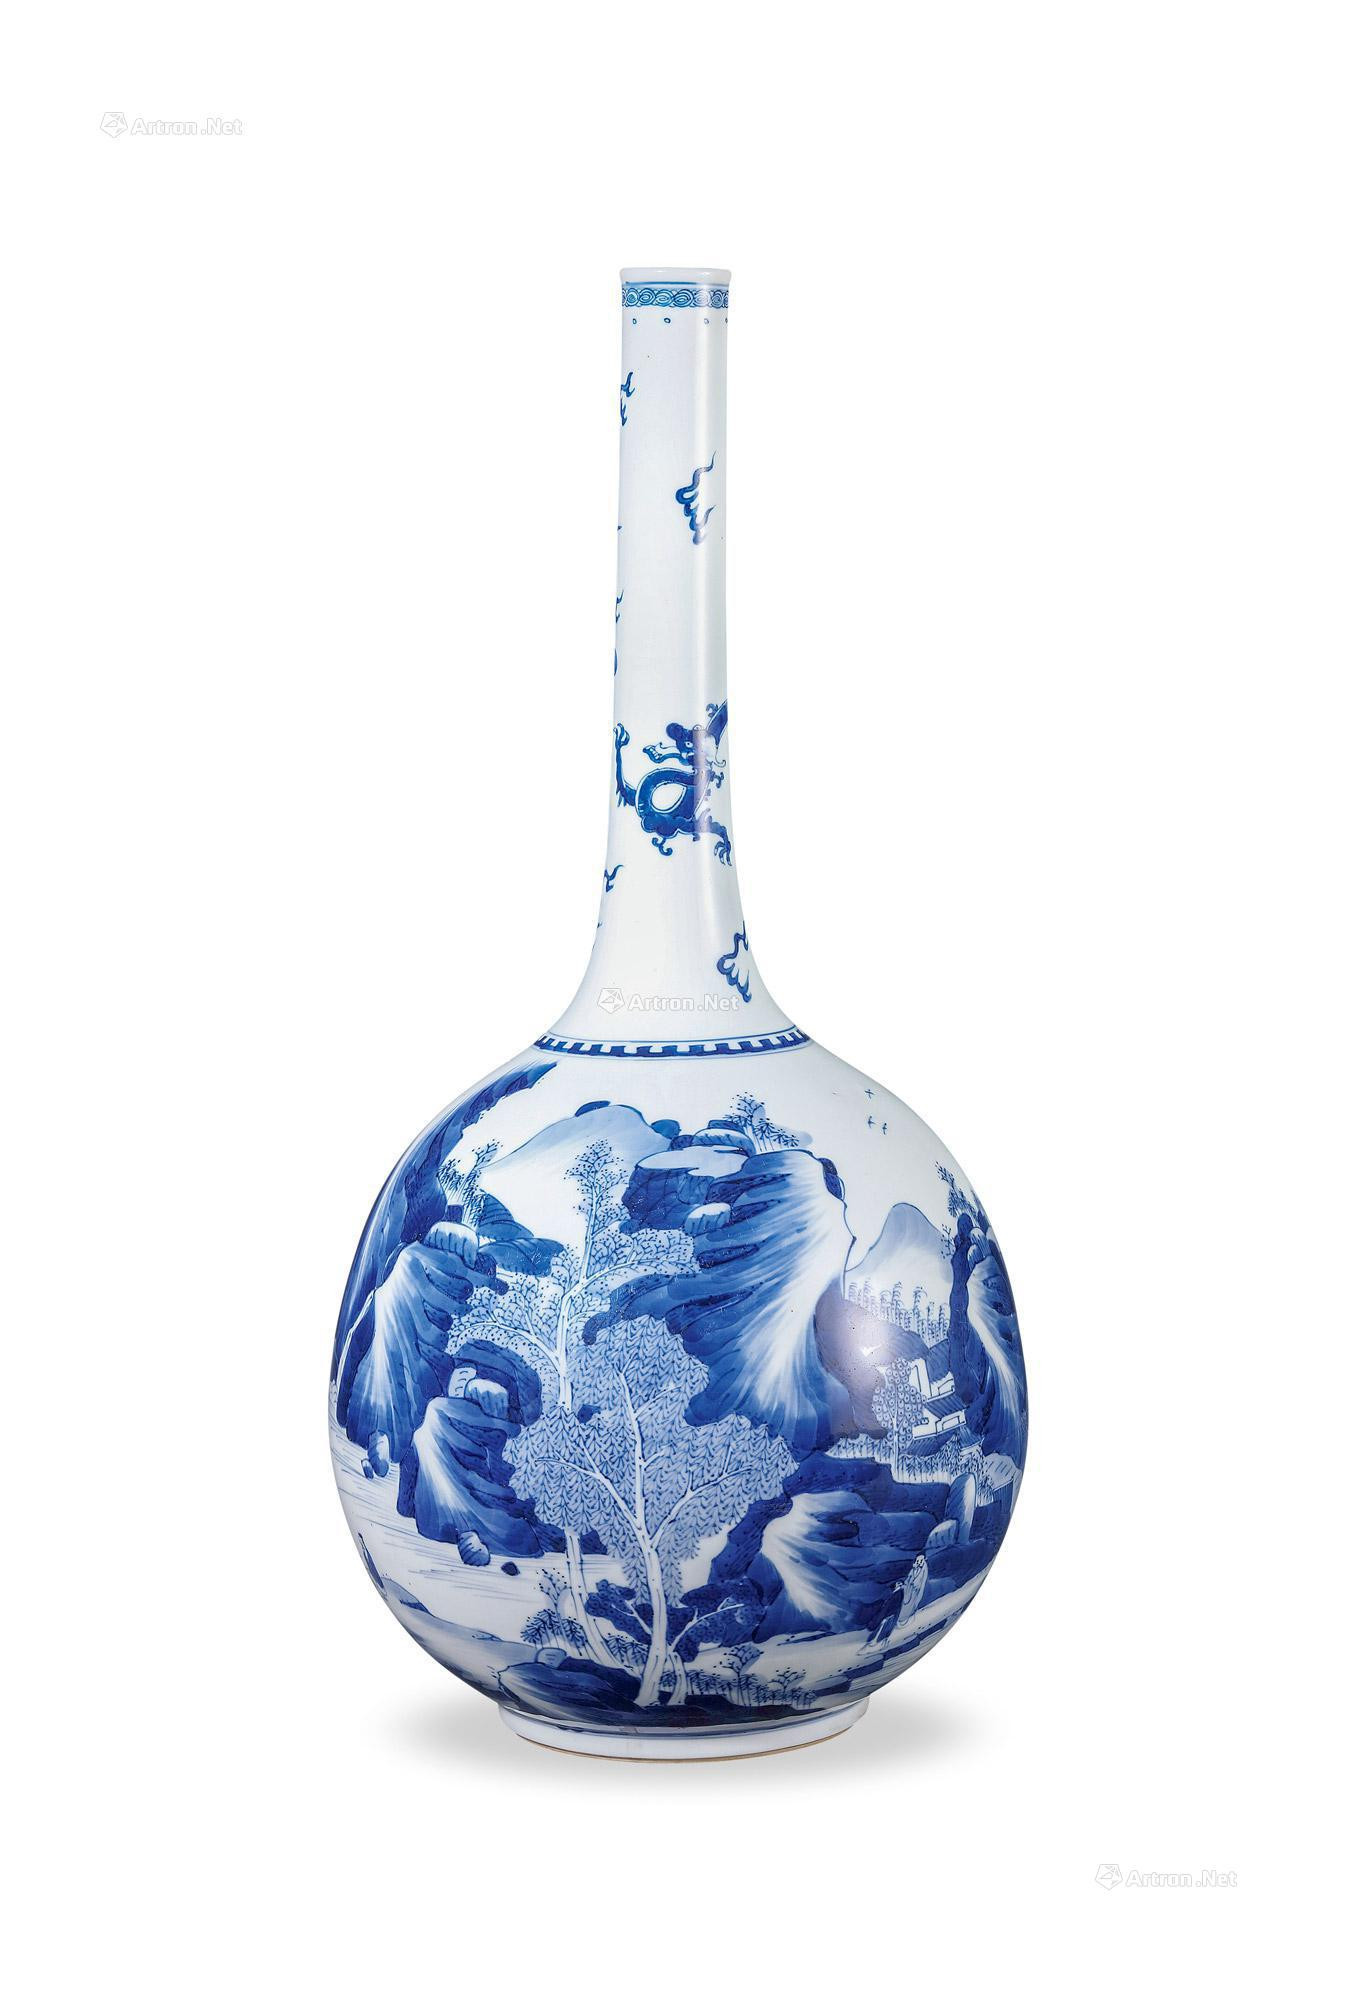 A BLUE AND WHITE VASE WITH LANDSCAPE AND FIGURES DESIGN